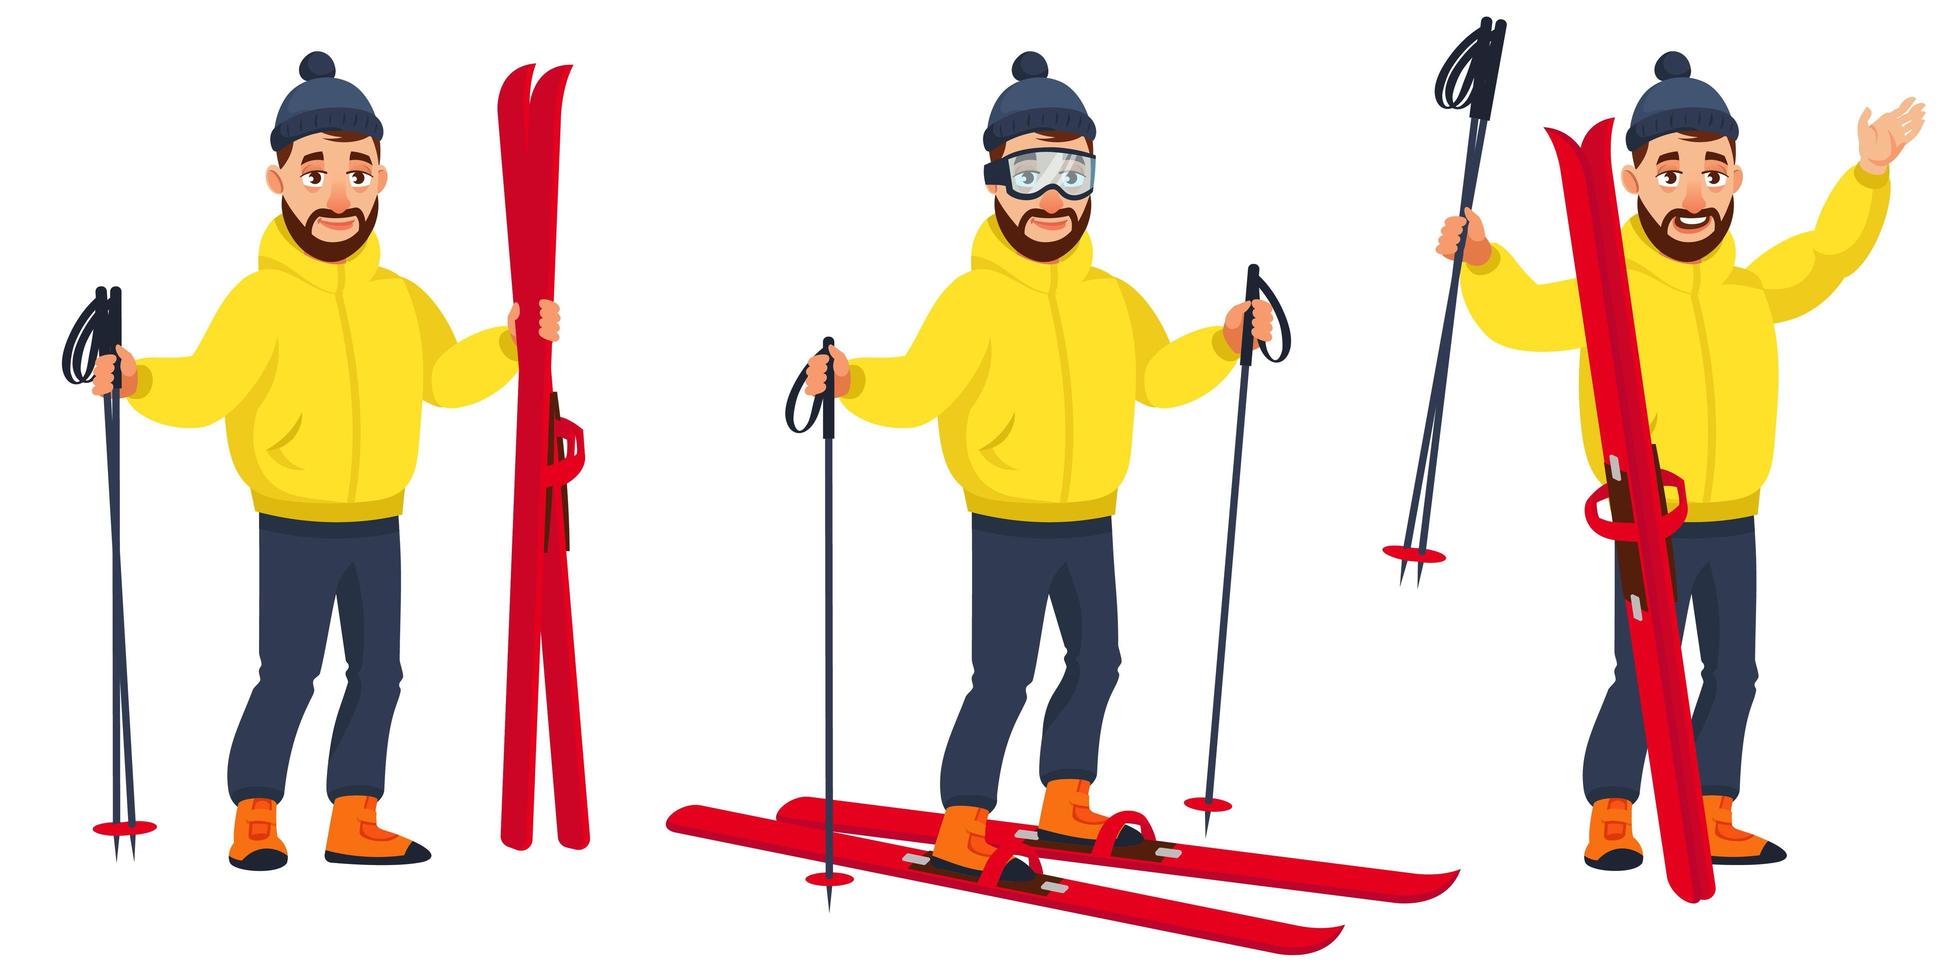 Skier in different poses vector